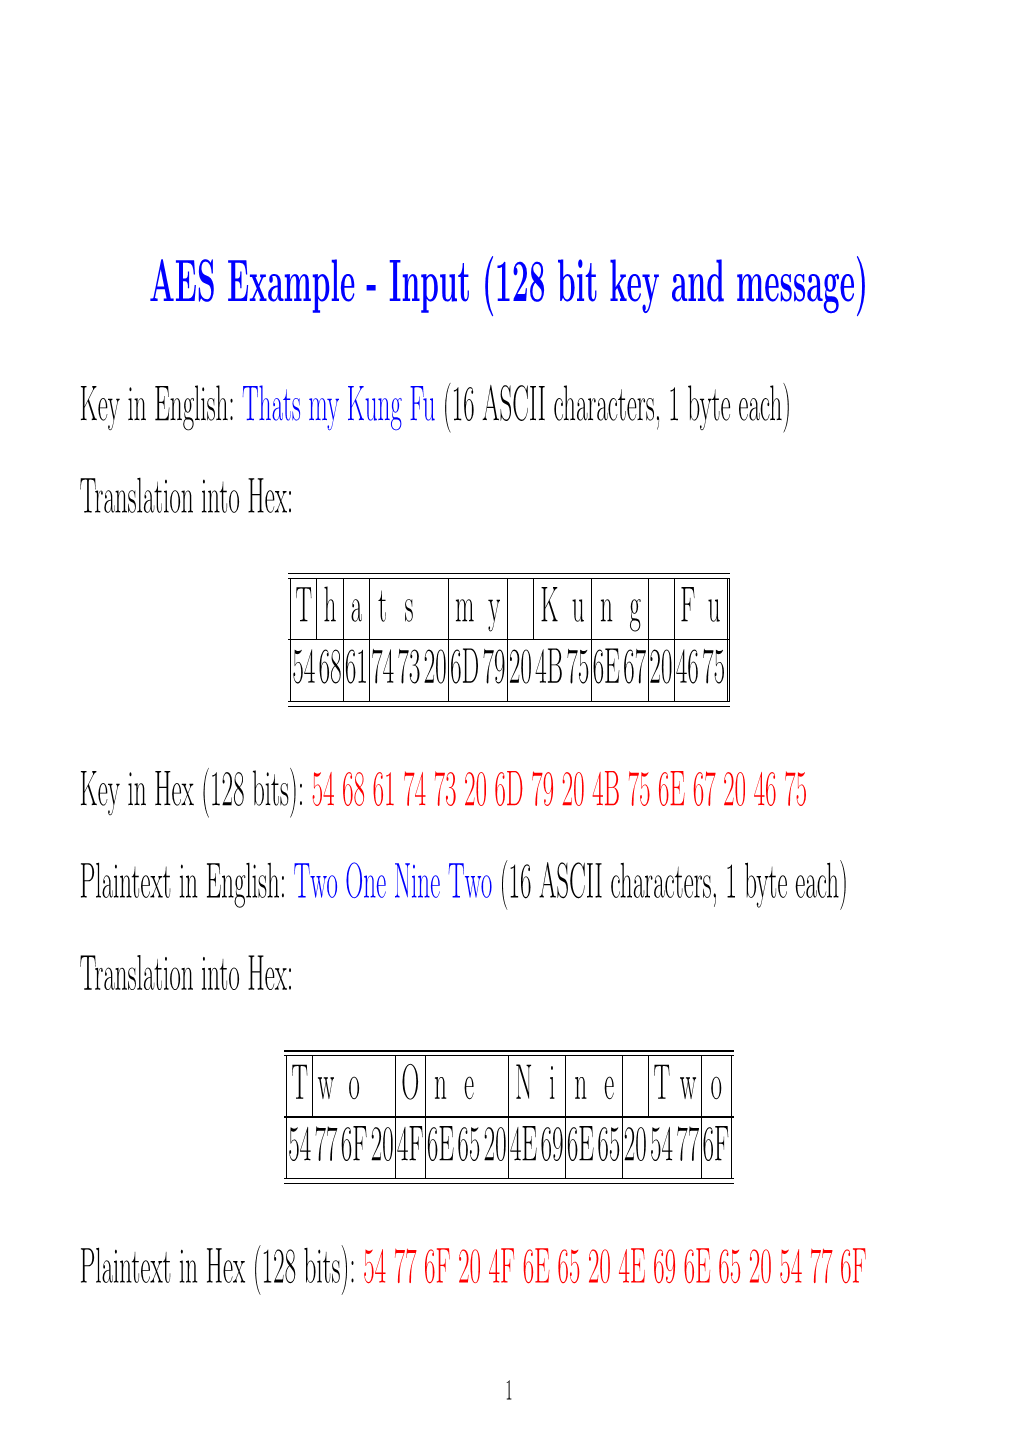 AES Example - Input (128 Bit Key and Message)